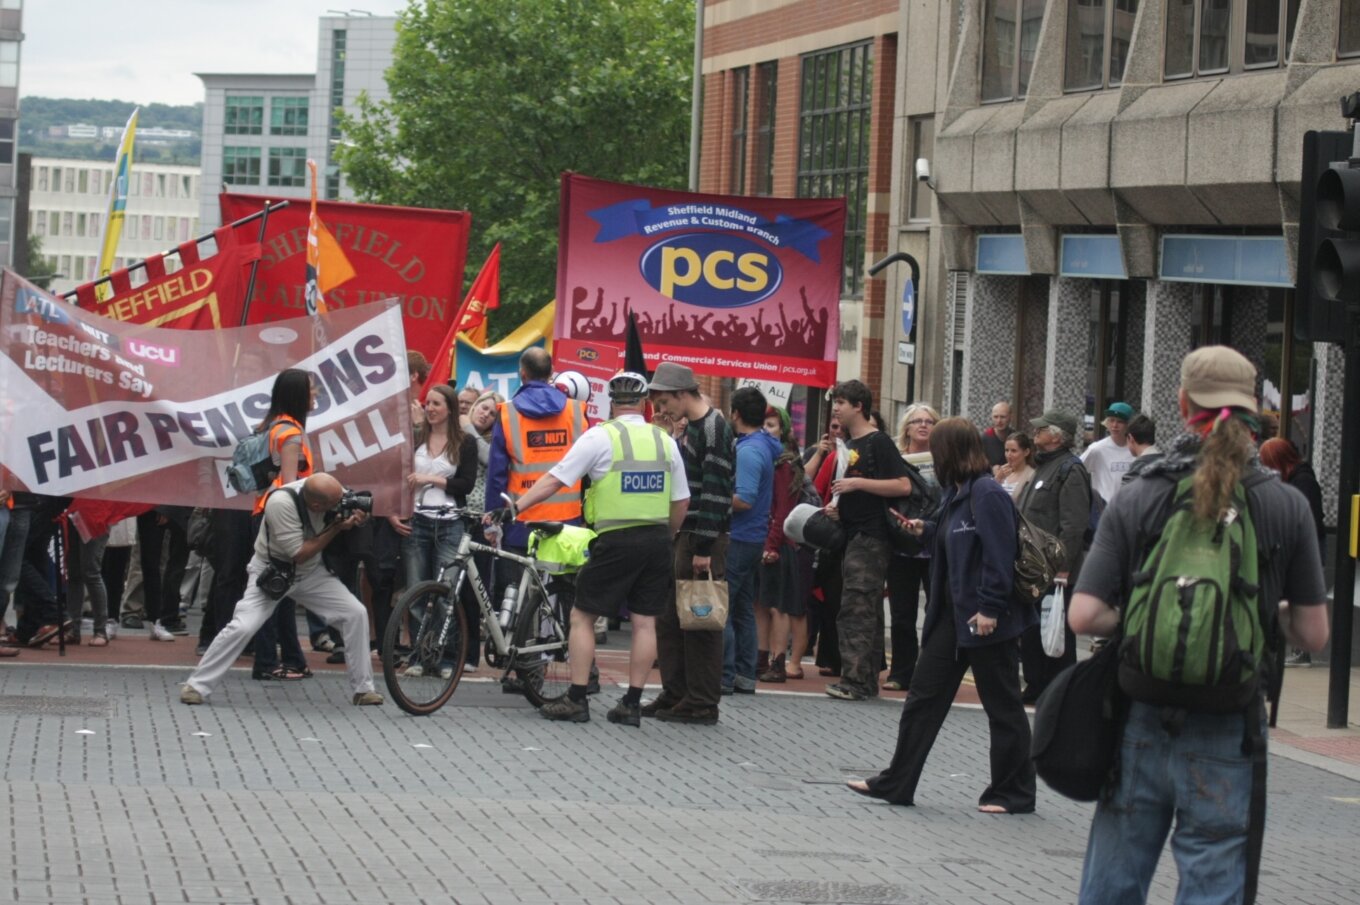 A Sheffield demo for fair pensions for all